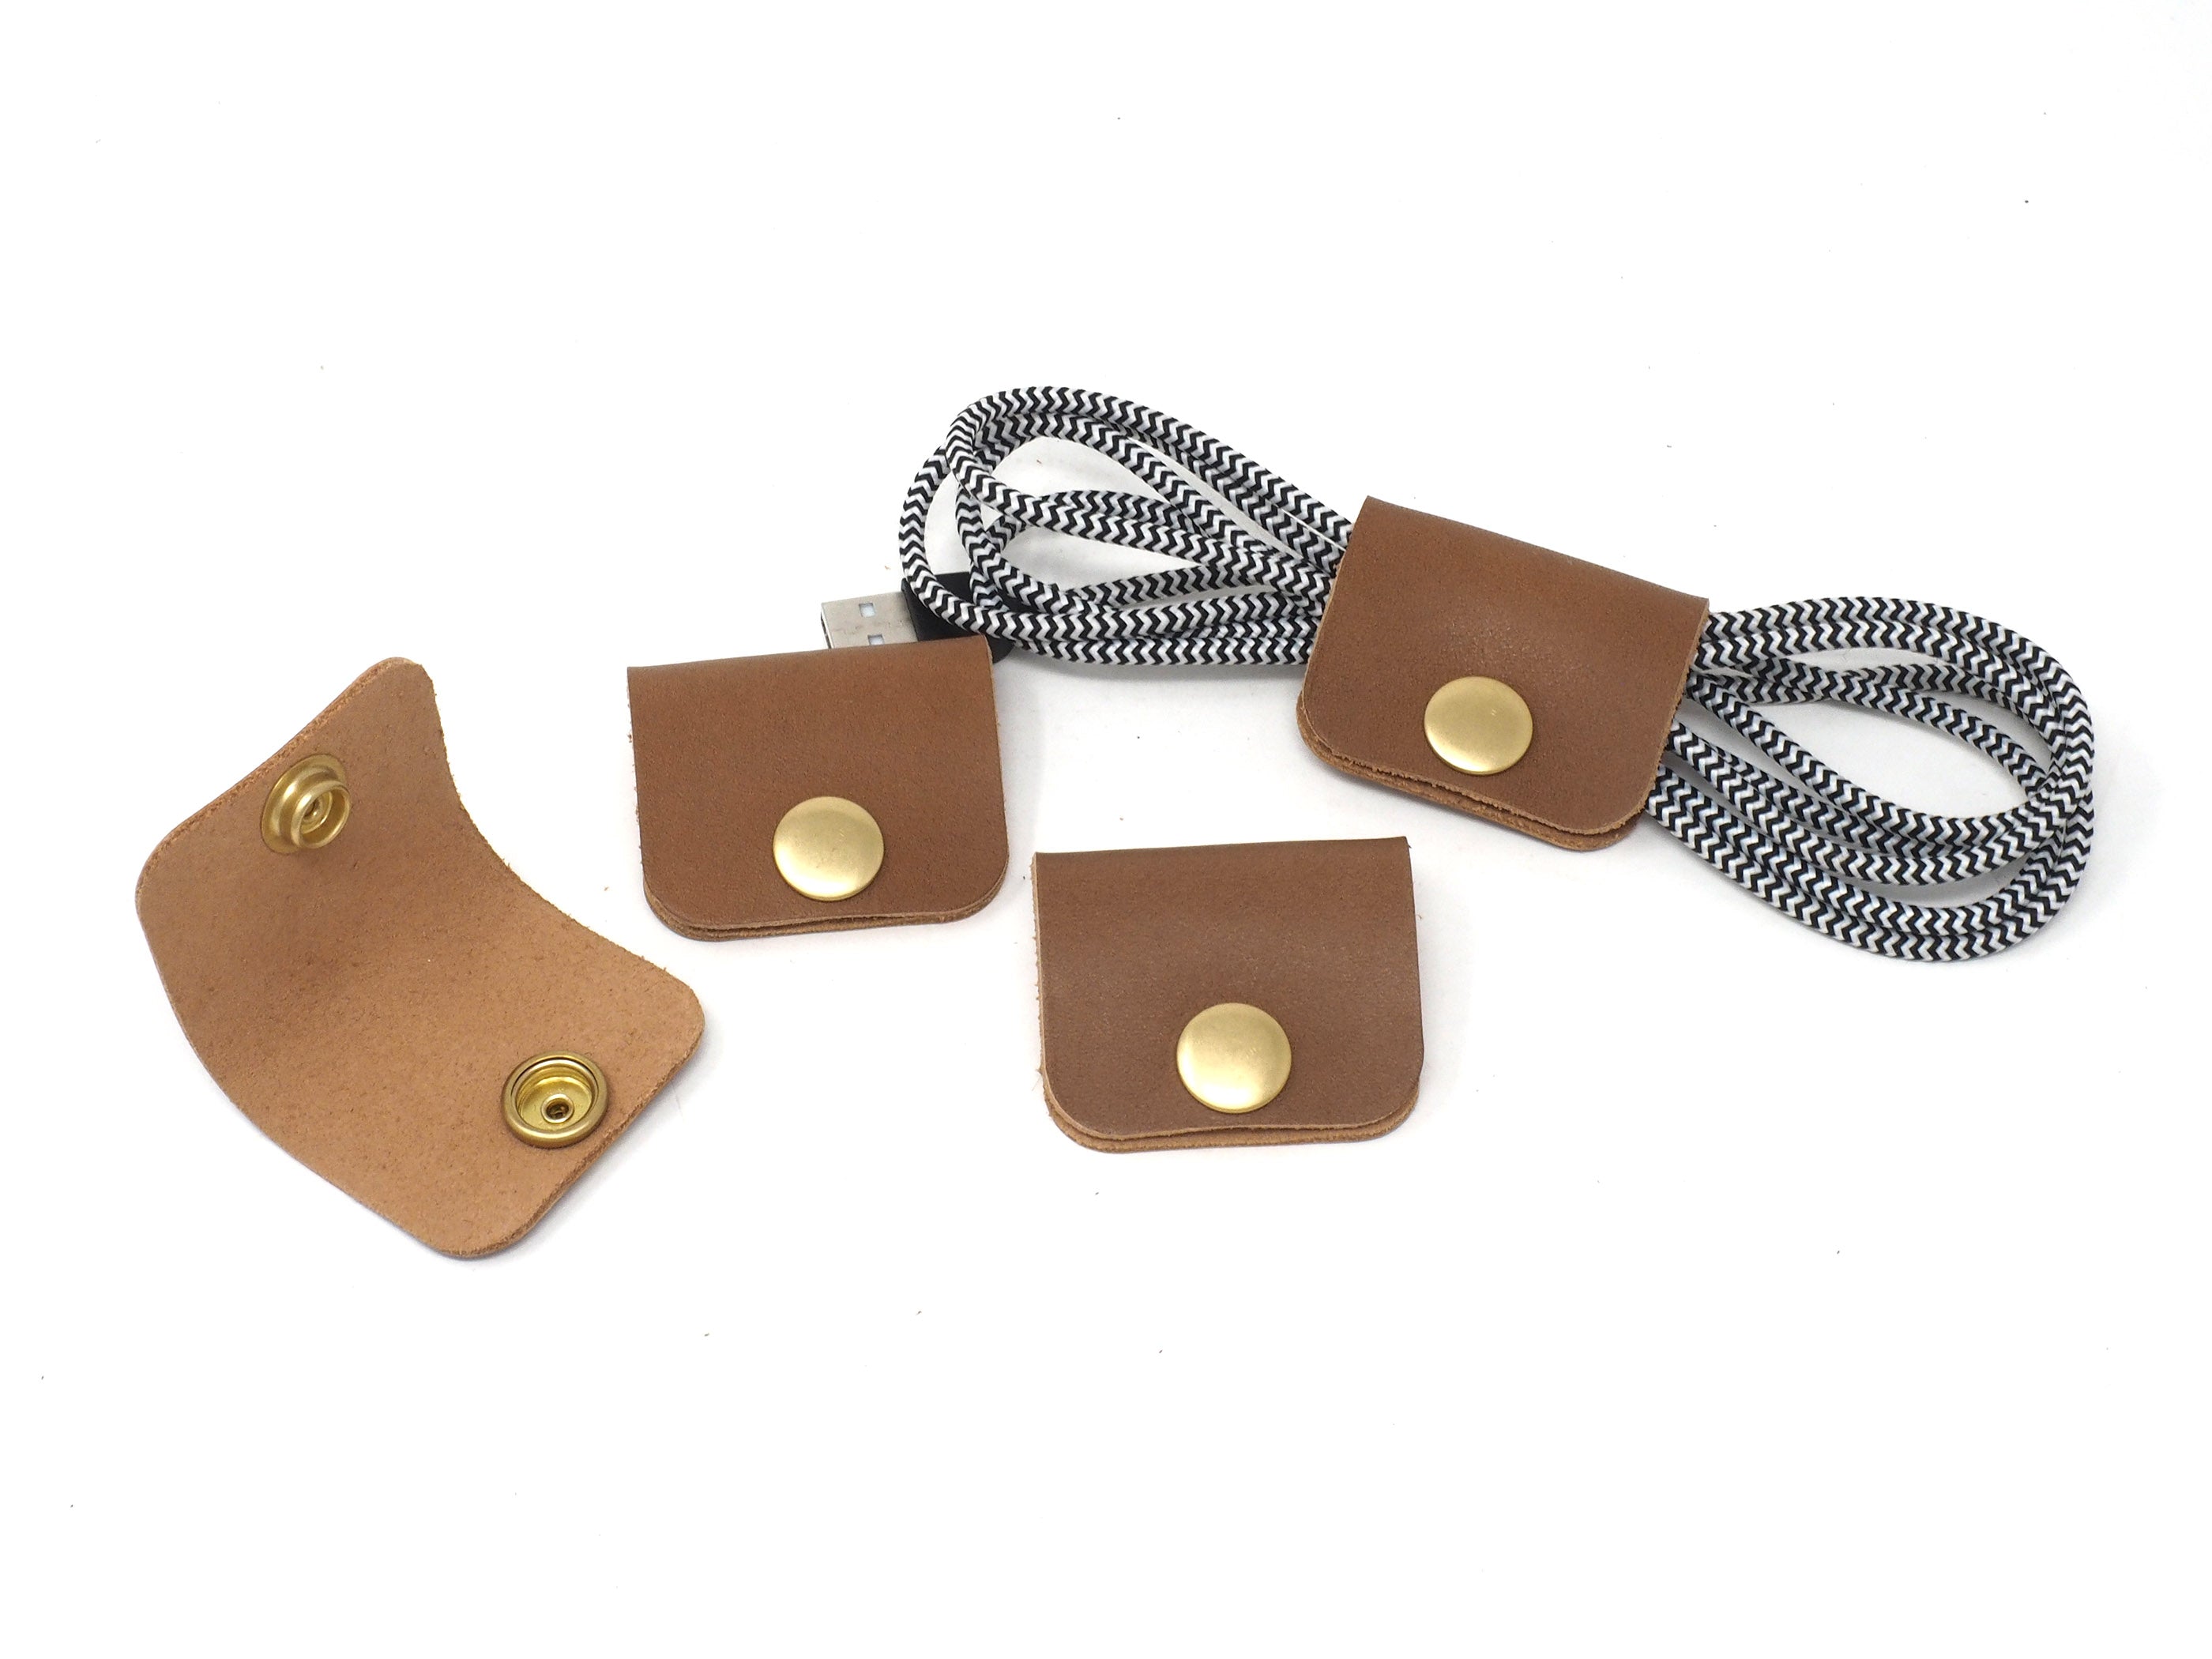 Cable Clip Leather Earphone Holder Leather Ear Buds Holder Leather Cord  Organizer Light Brown Leather Cord Tie Leather Wrap Holder 